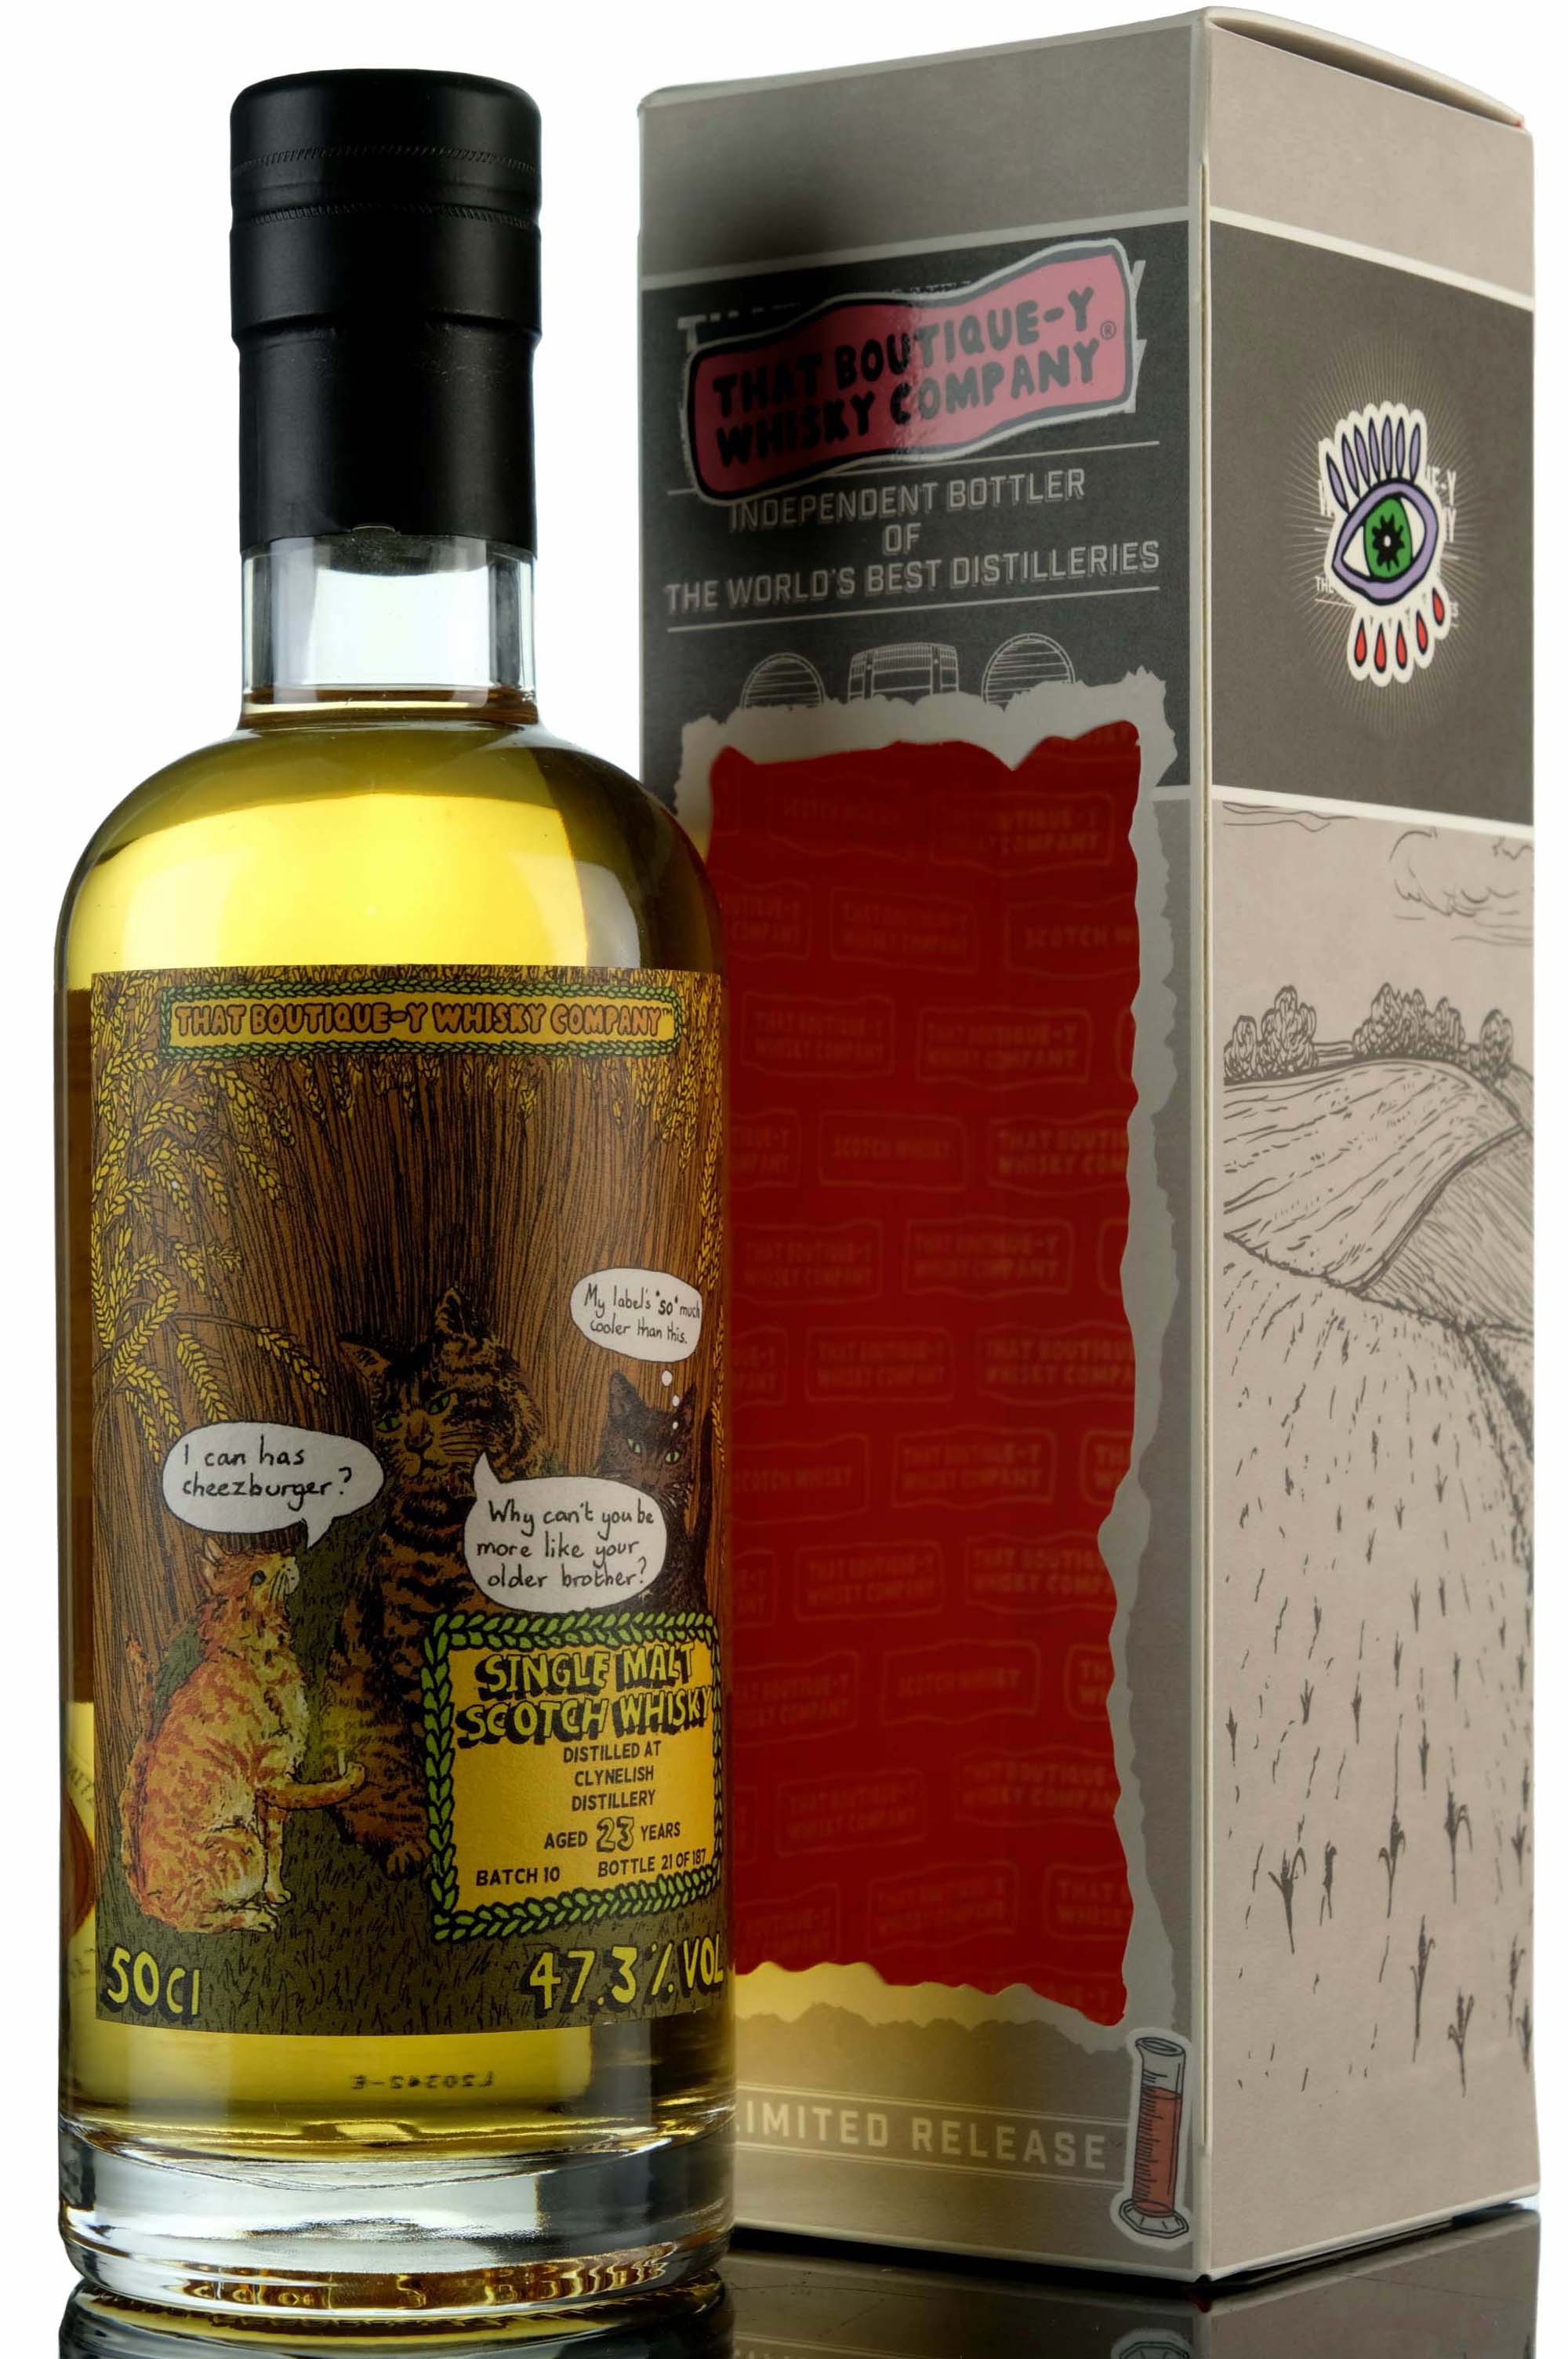 Clynelish 23 Year Old - That Boutique-y Whisky Company - Batch 10 - 2021 Release